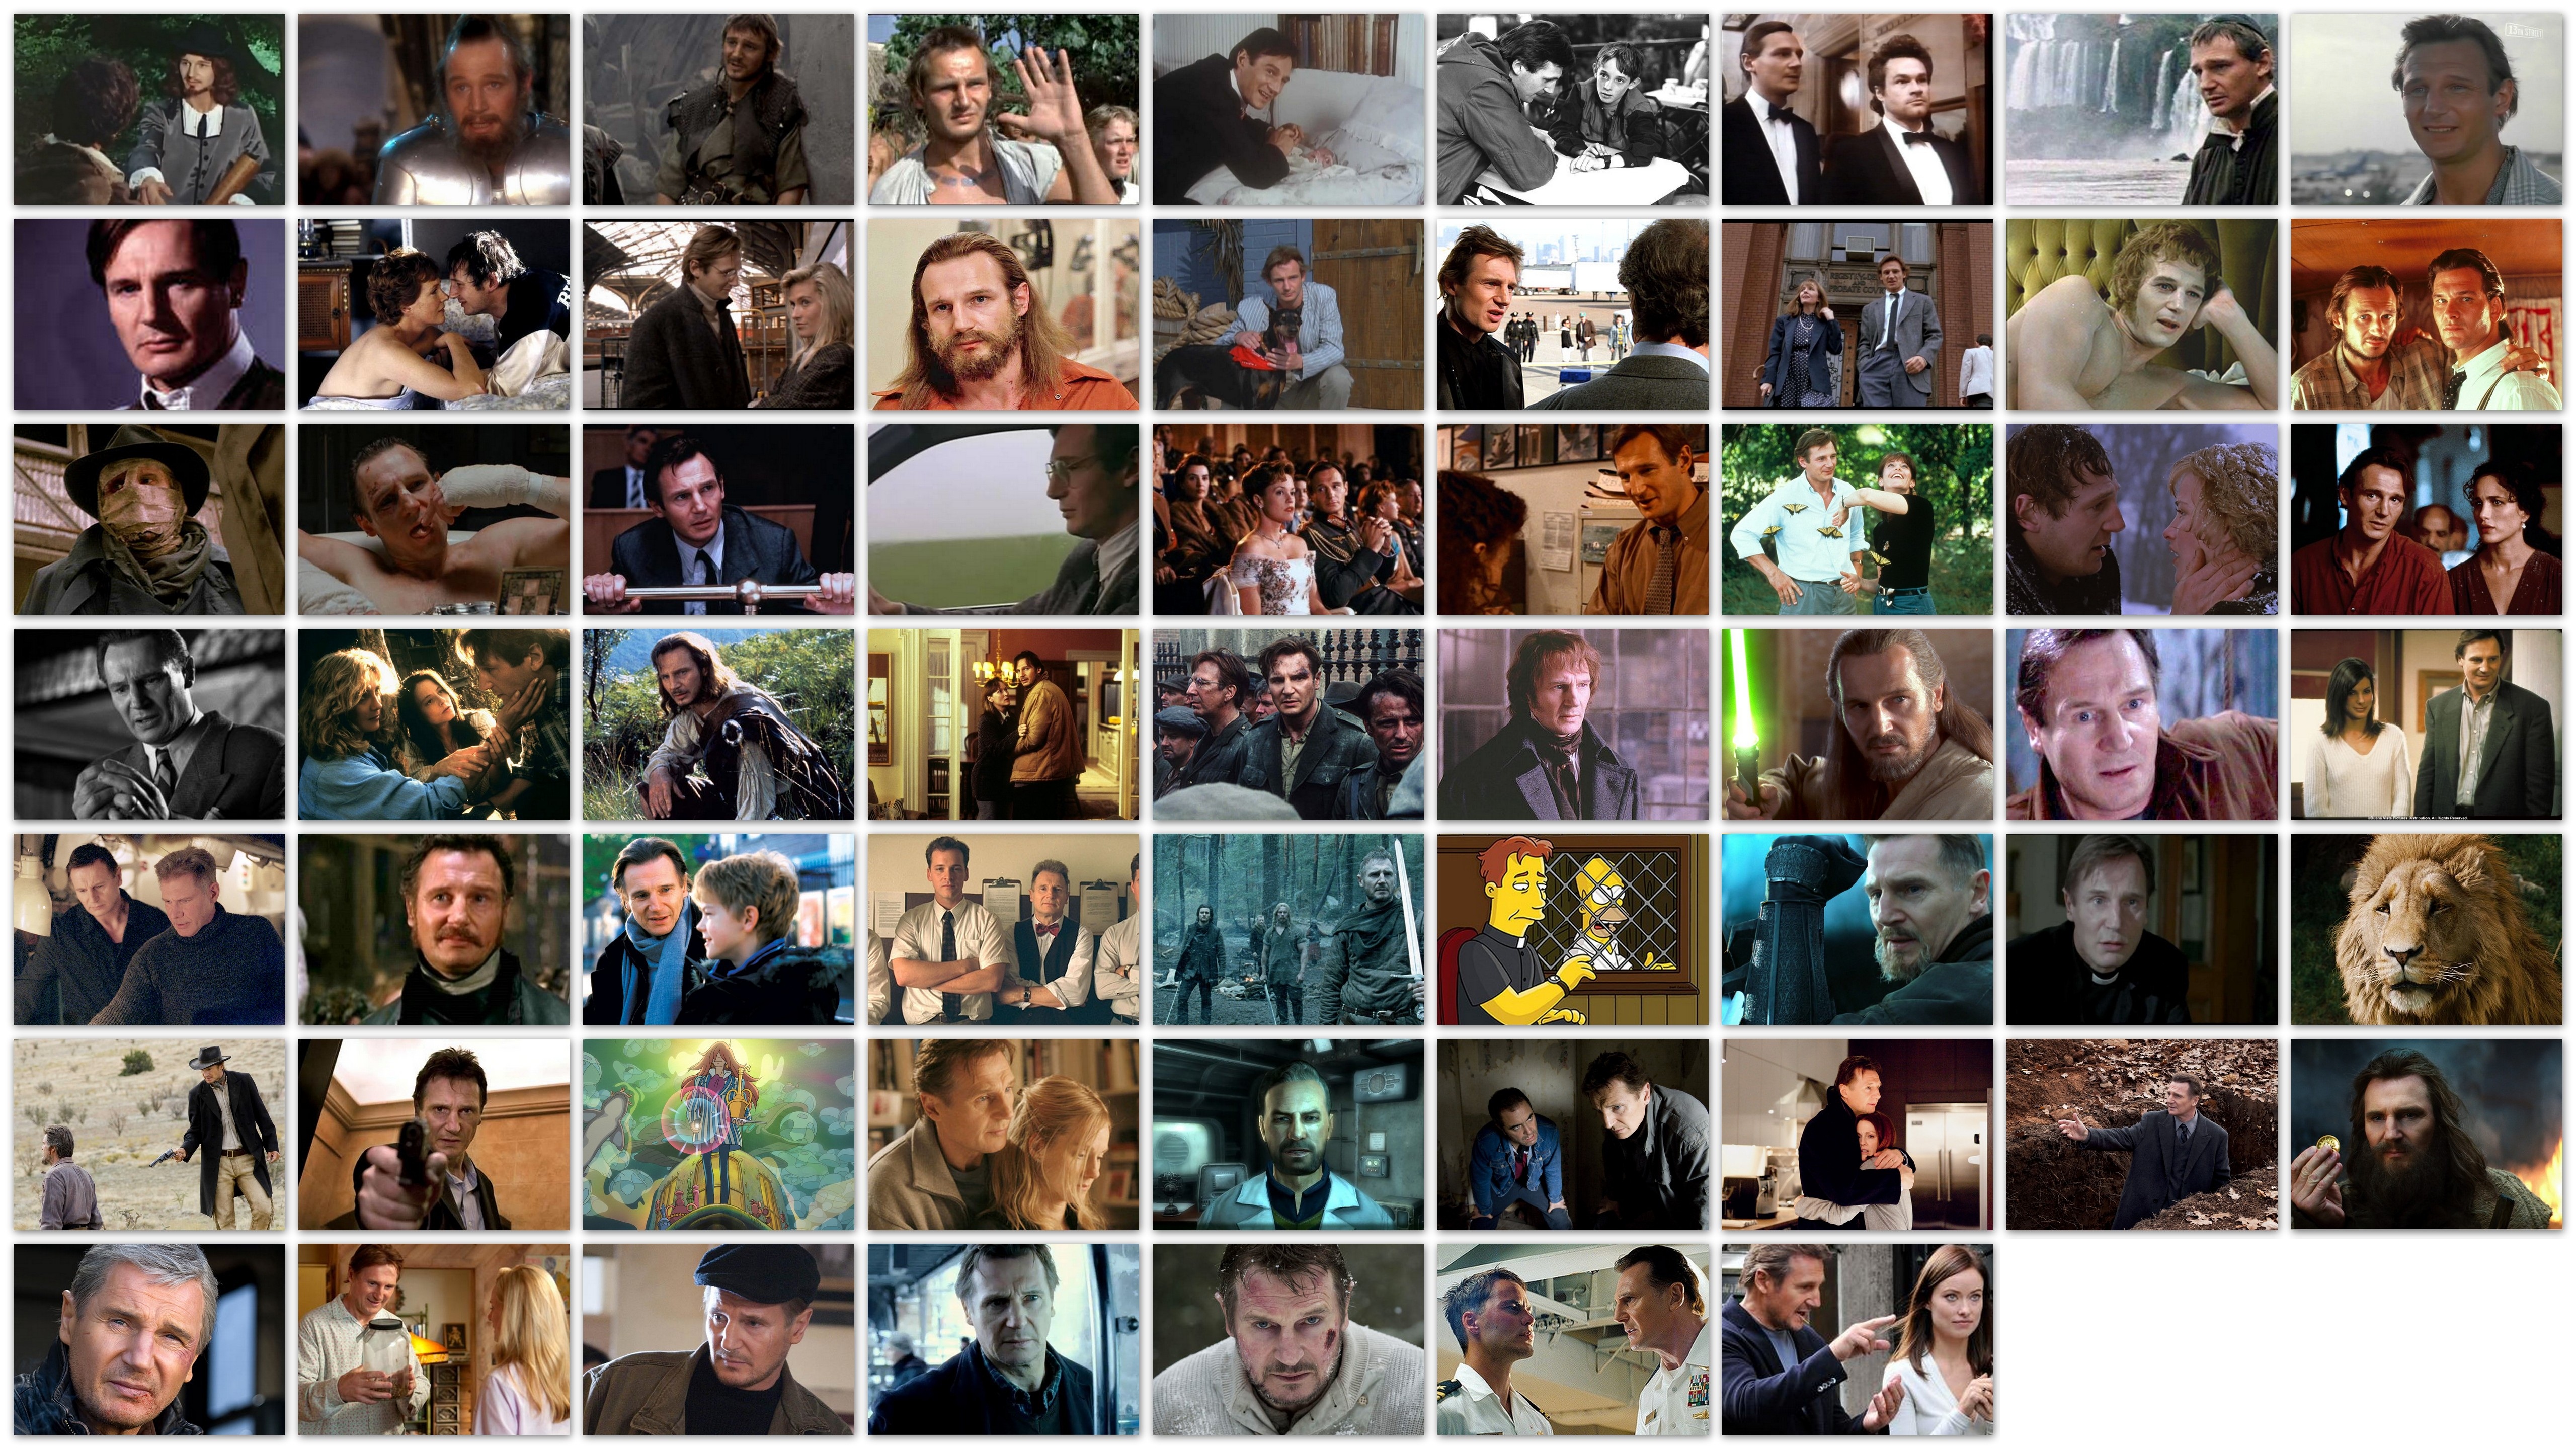 Overview of roles of actor Liam Neeson in his movies